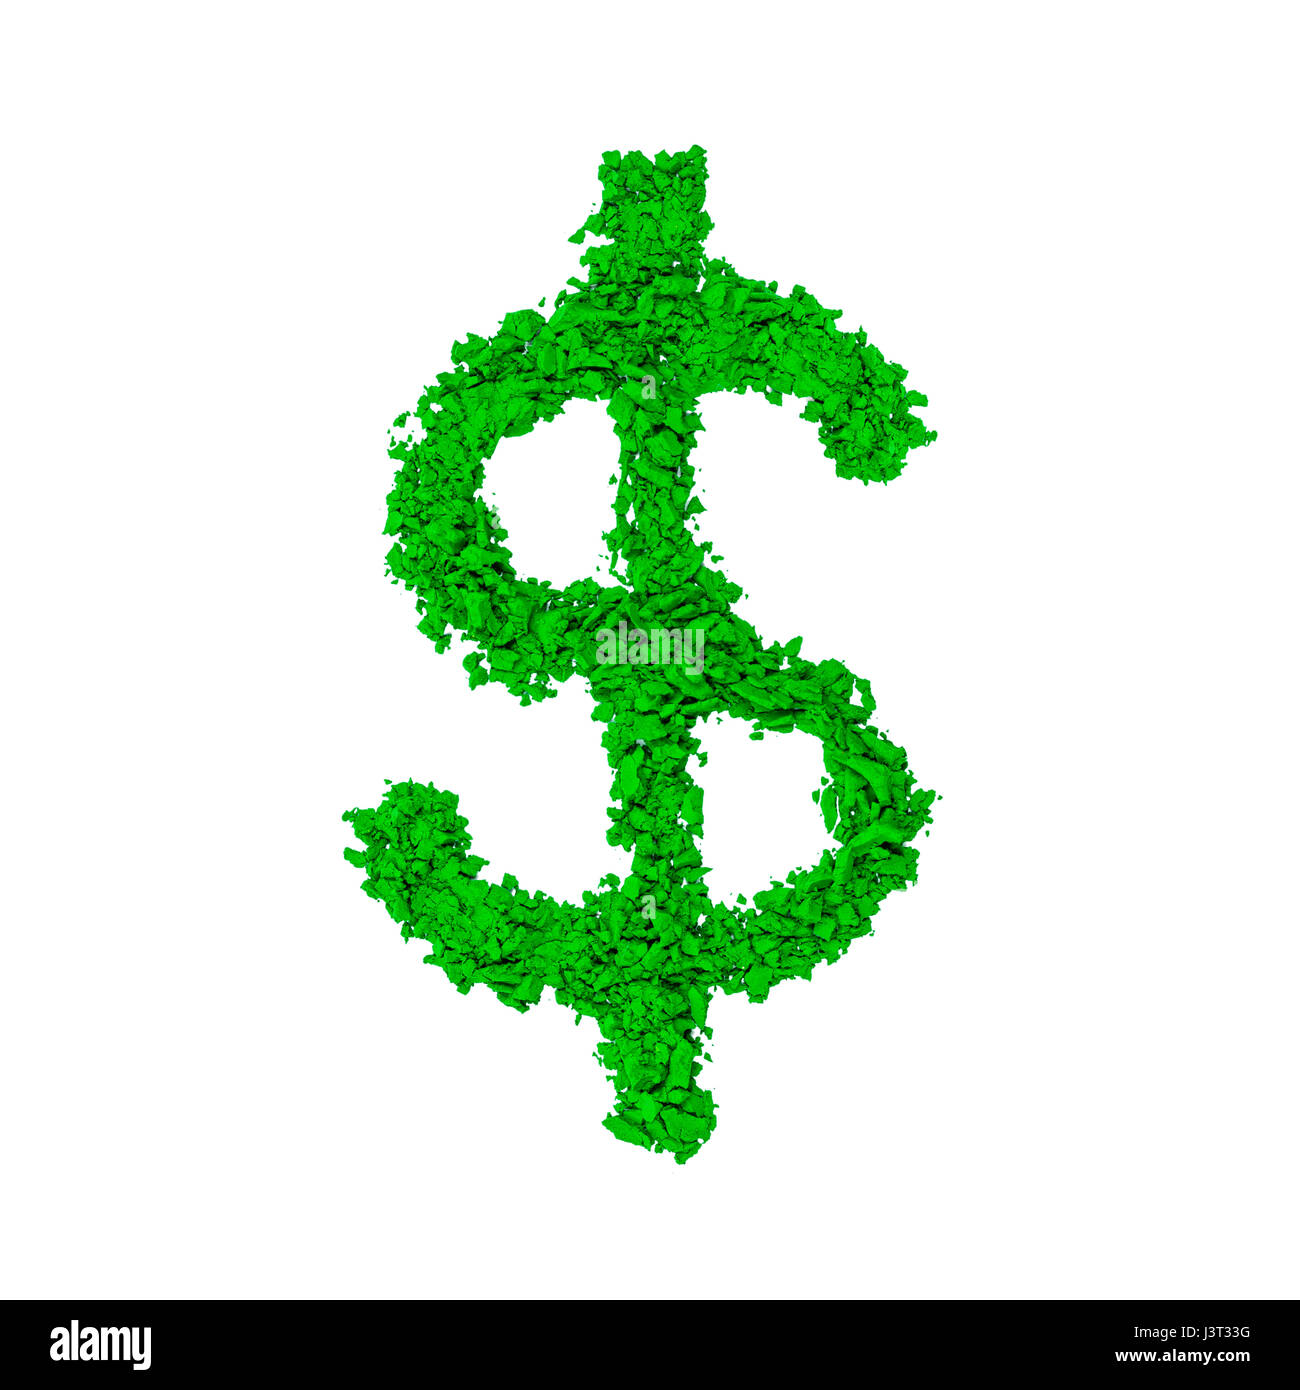 The US Dollar Sign made with green color powder and isolated on a white background. Stock Photo